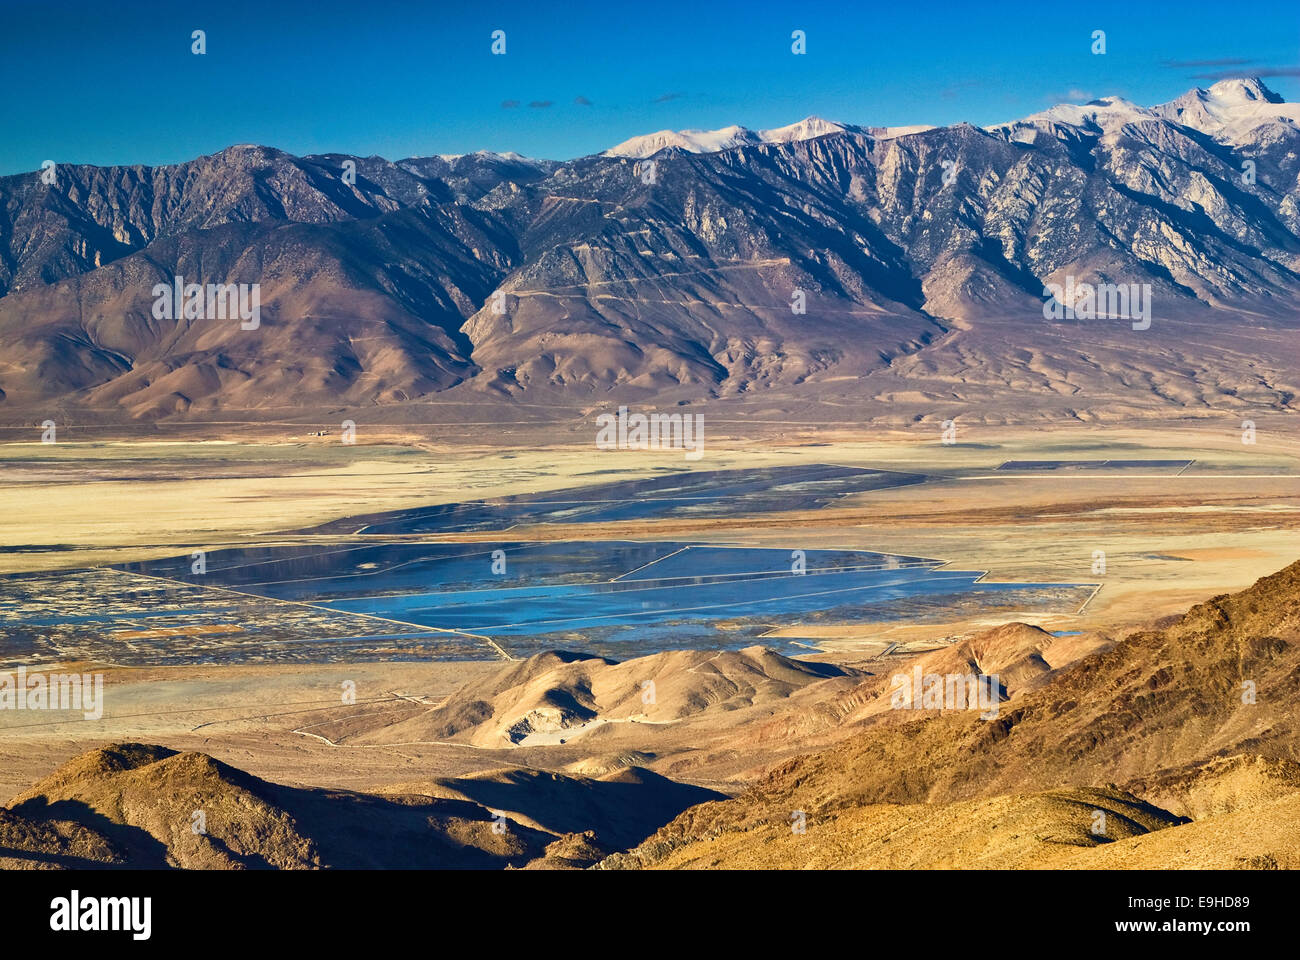 Owens Lake and Eastern Sierra Nevada seen across Owens Valley from Cerro Gordo Road in Inyo Mtns at sunrise, California, USA Stock Photo